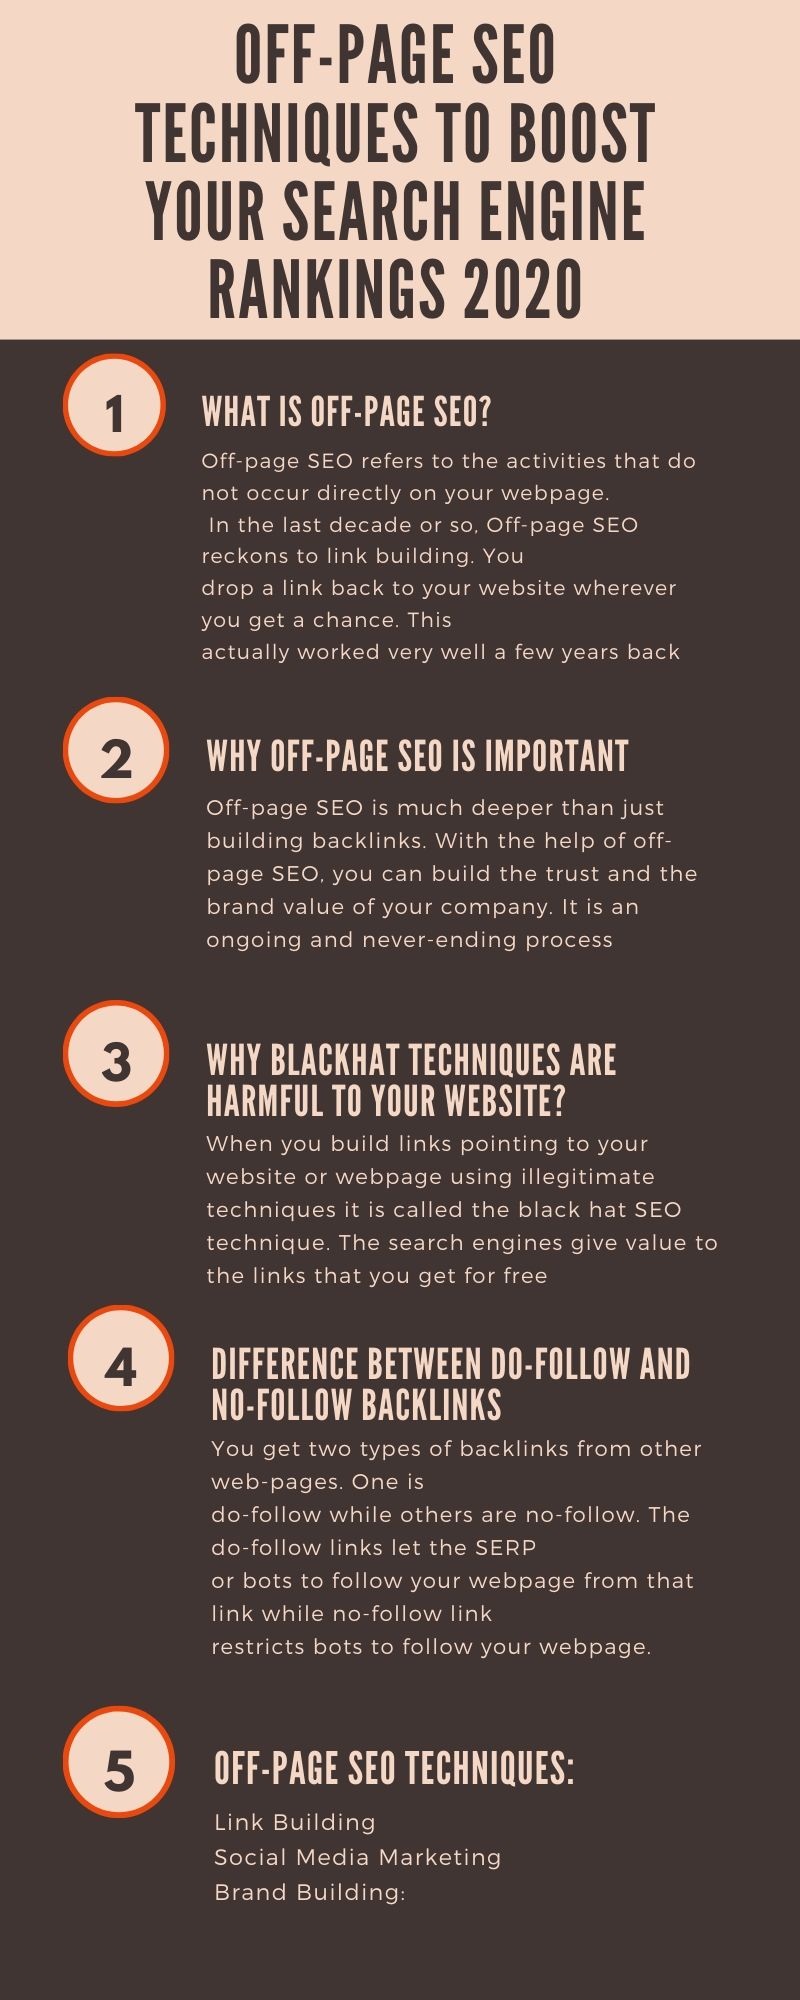 Off-page SEO Techniques to Boost Your Search Engine Rankings 2020